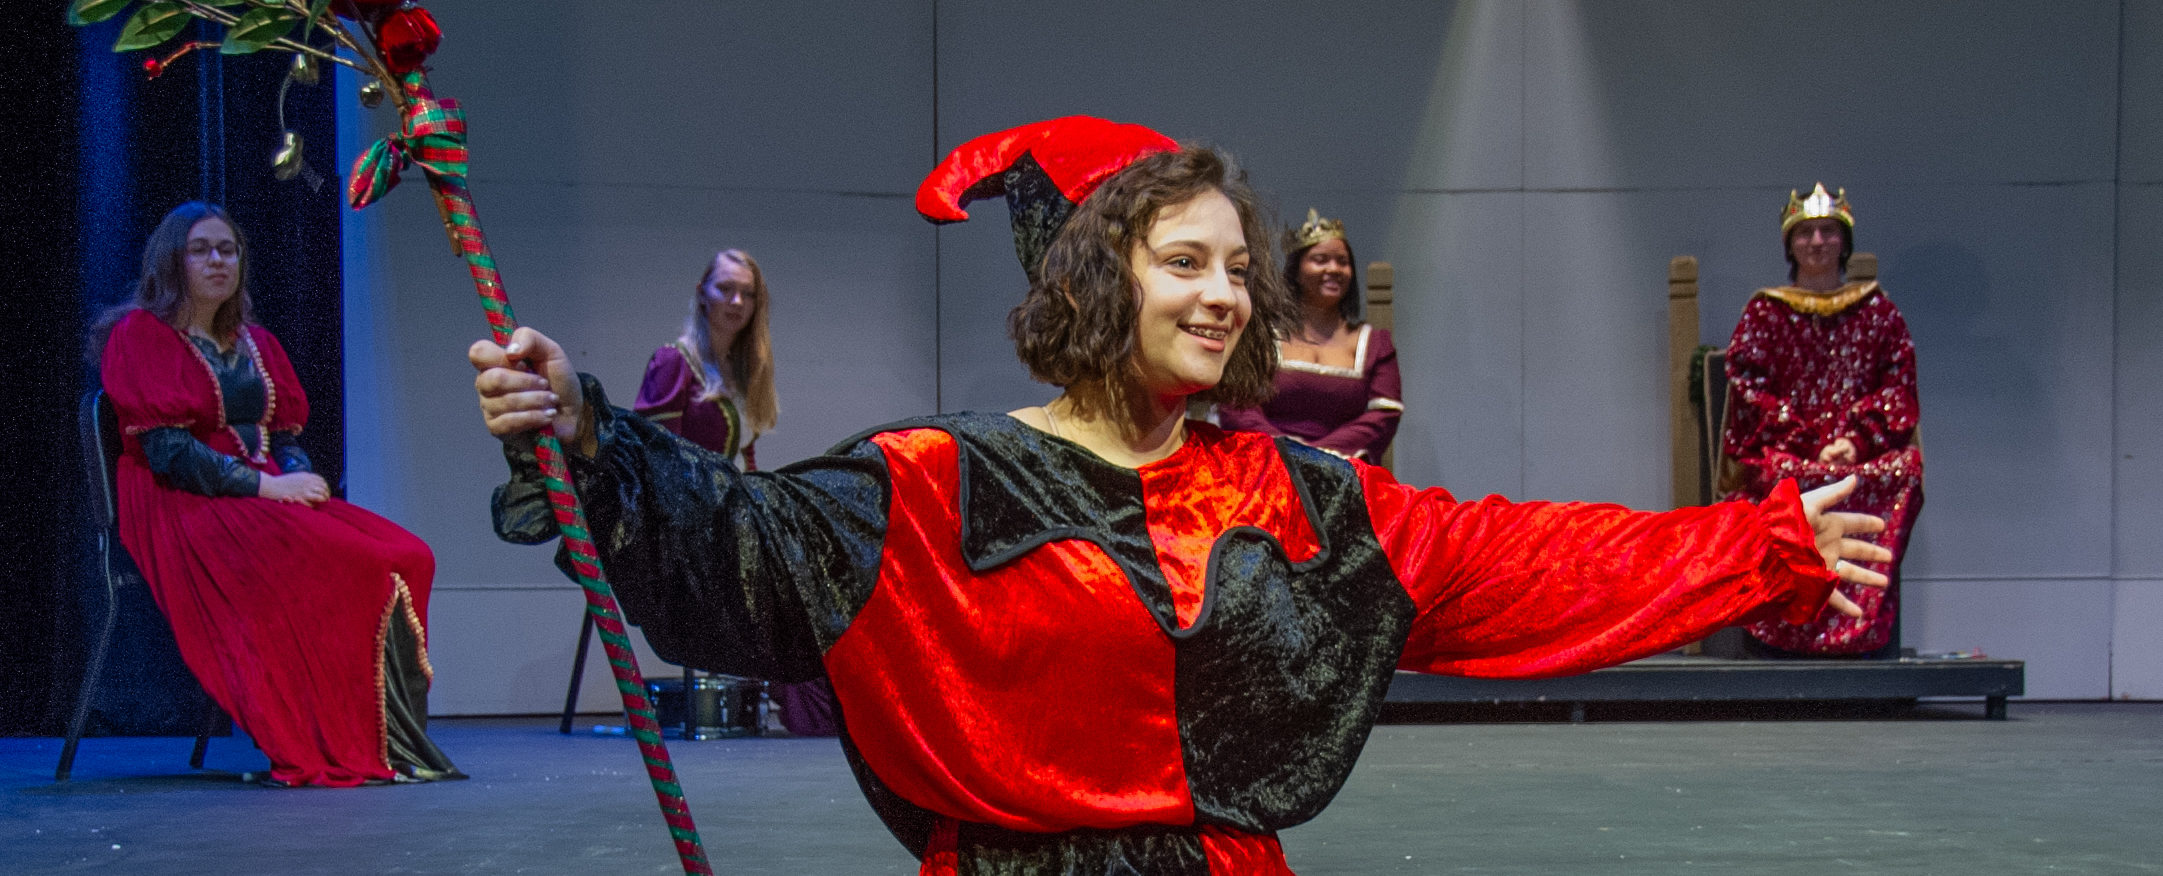 Blackburn student actor performing on stage at the Bothwell Auditorium. Four other student actors can be seen in the background. All of the actors are wearing medieval clothes. HELP